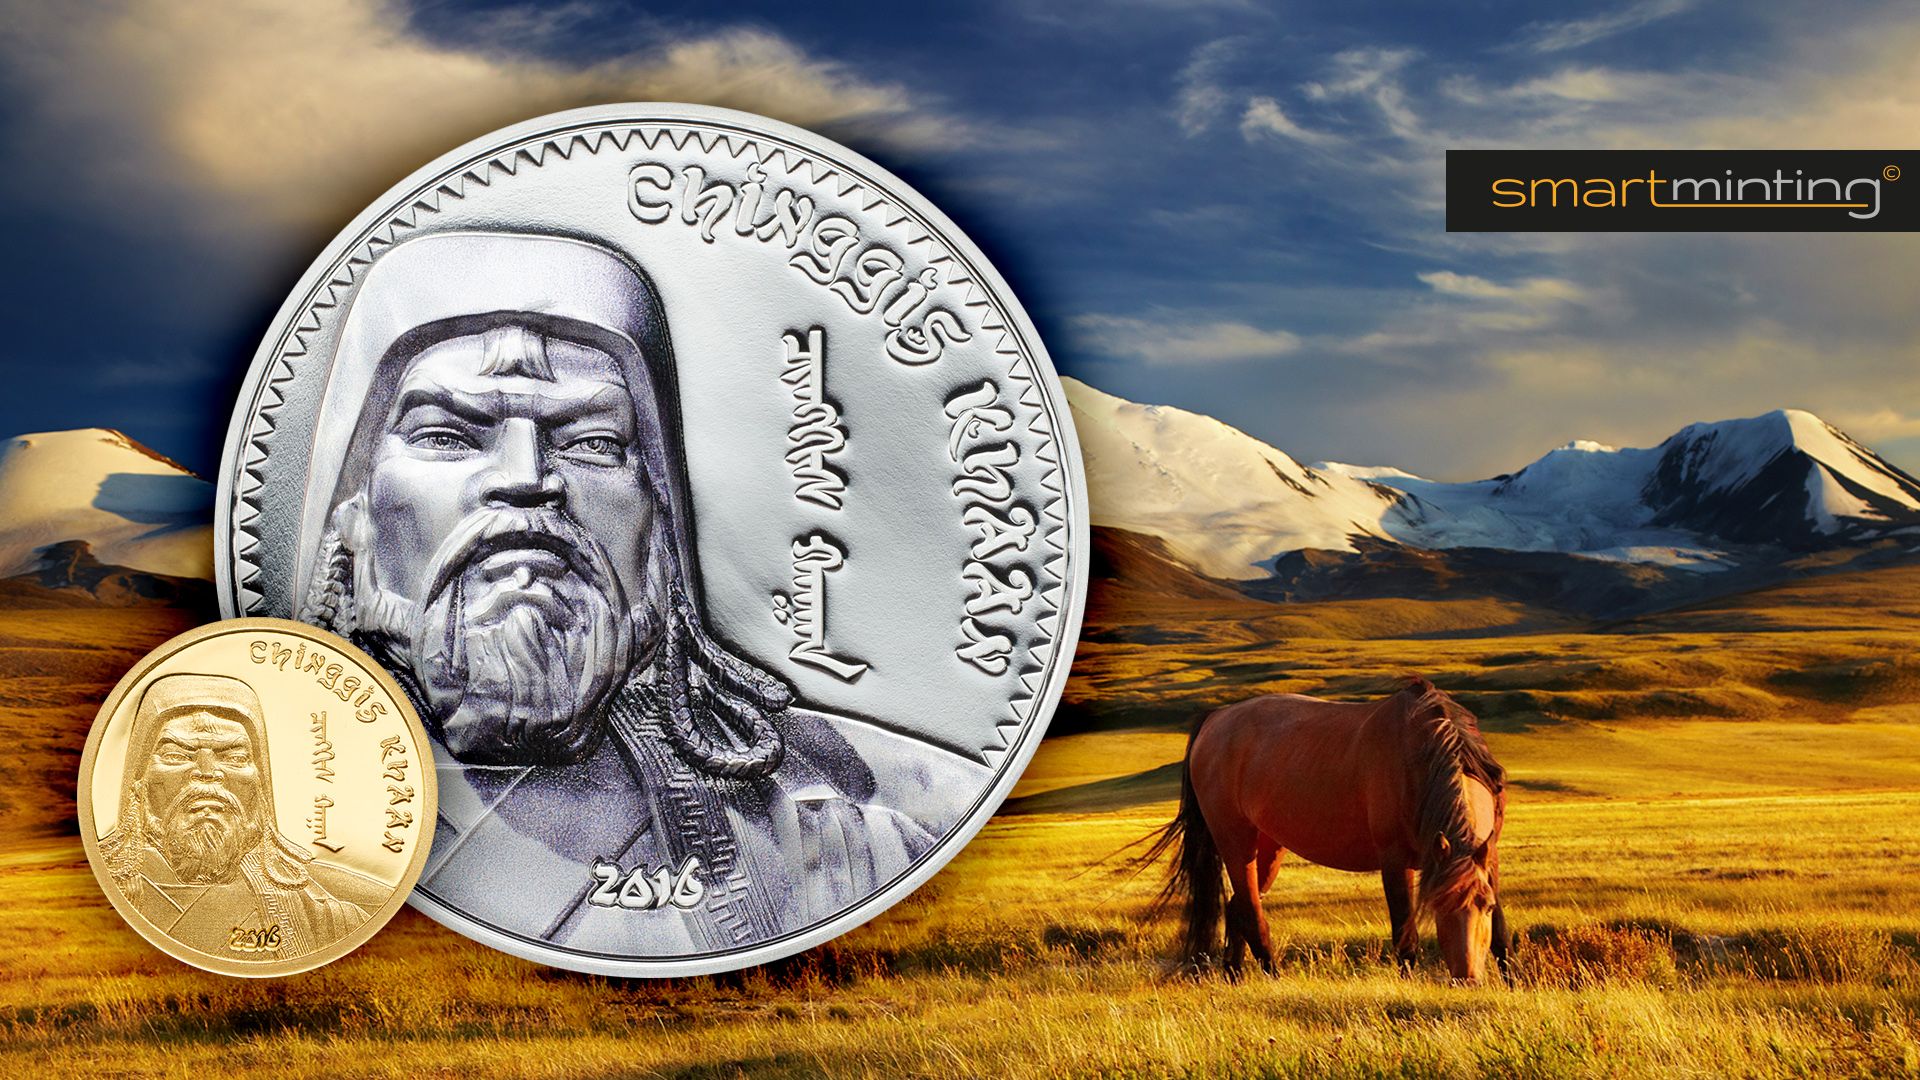 2016 Revolutionaries Chinggis Khaan Coin Collection